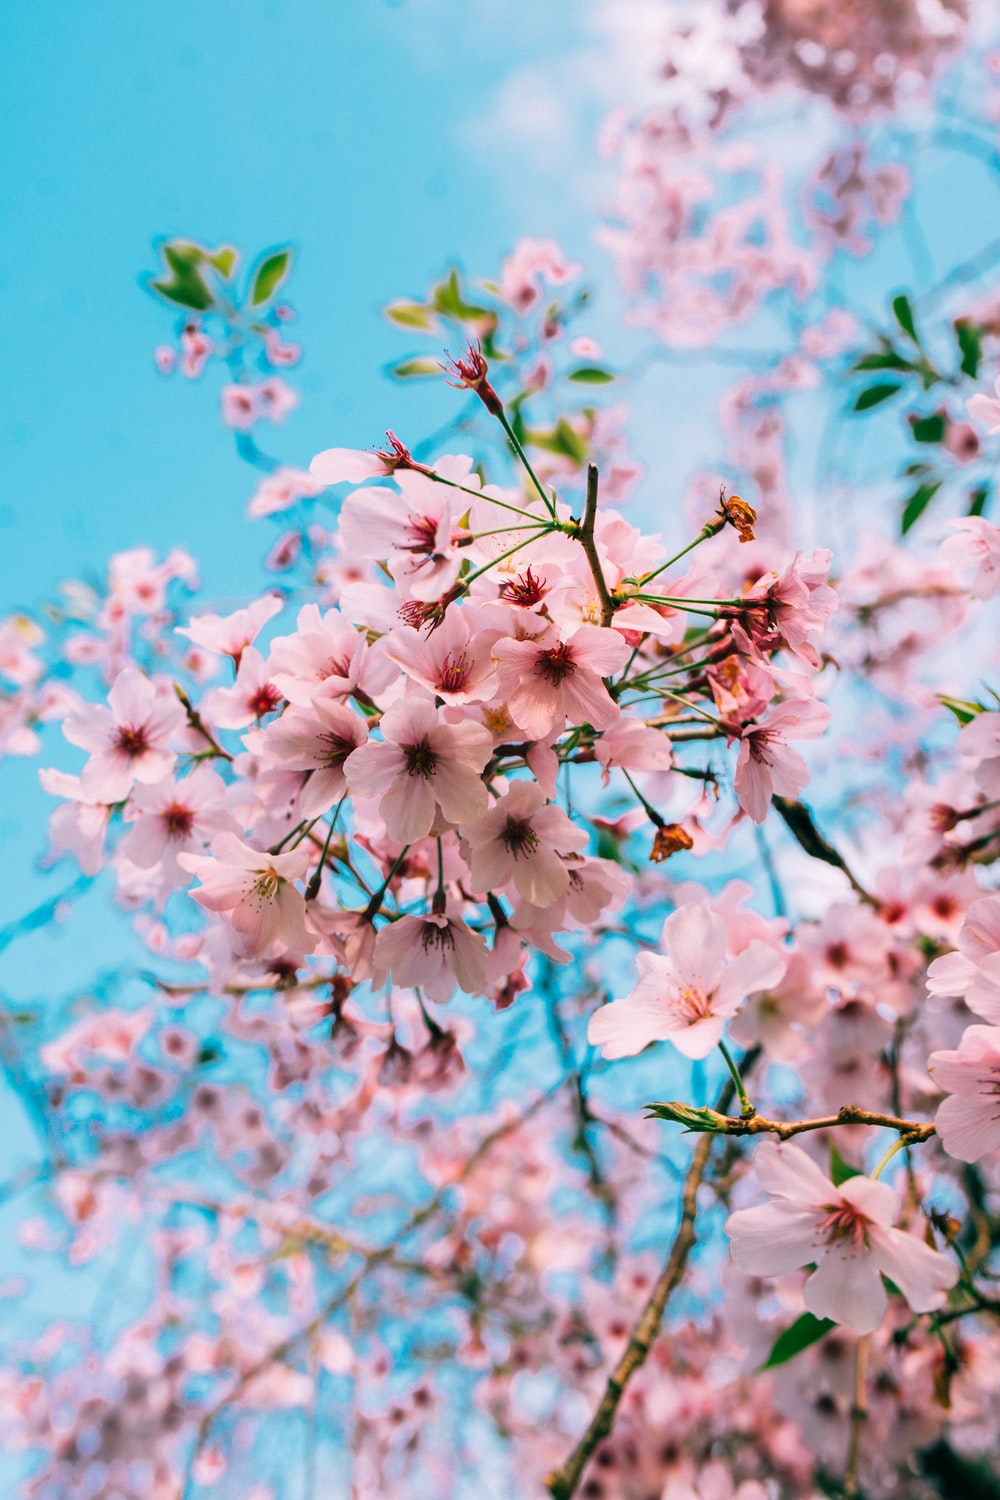 Cherry Blossom Aesthetic Wallpapers